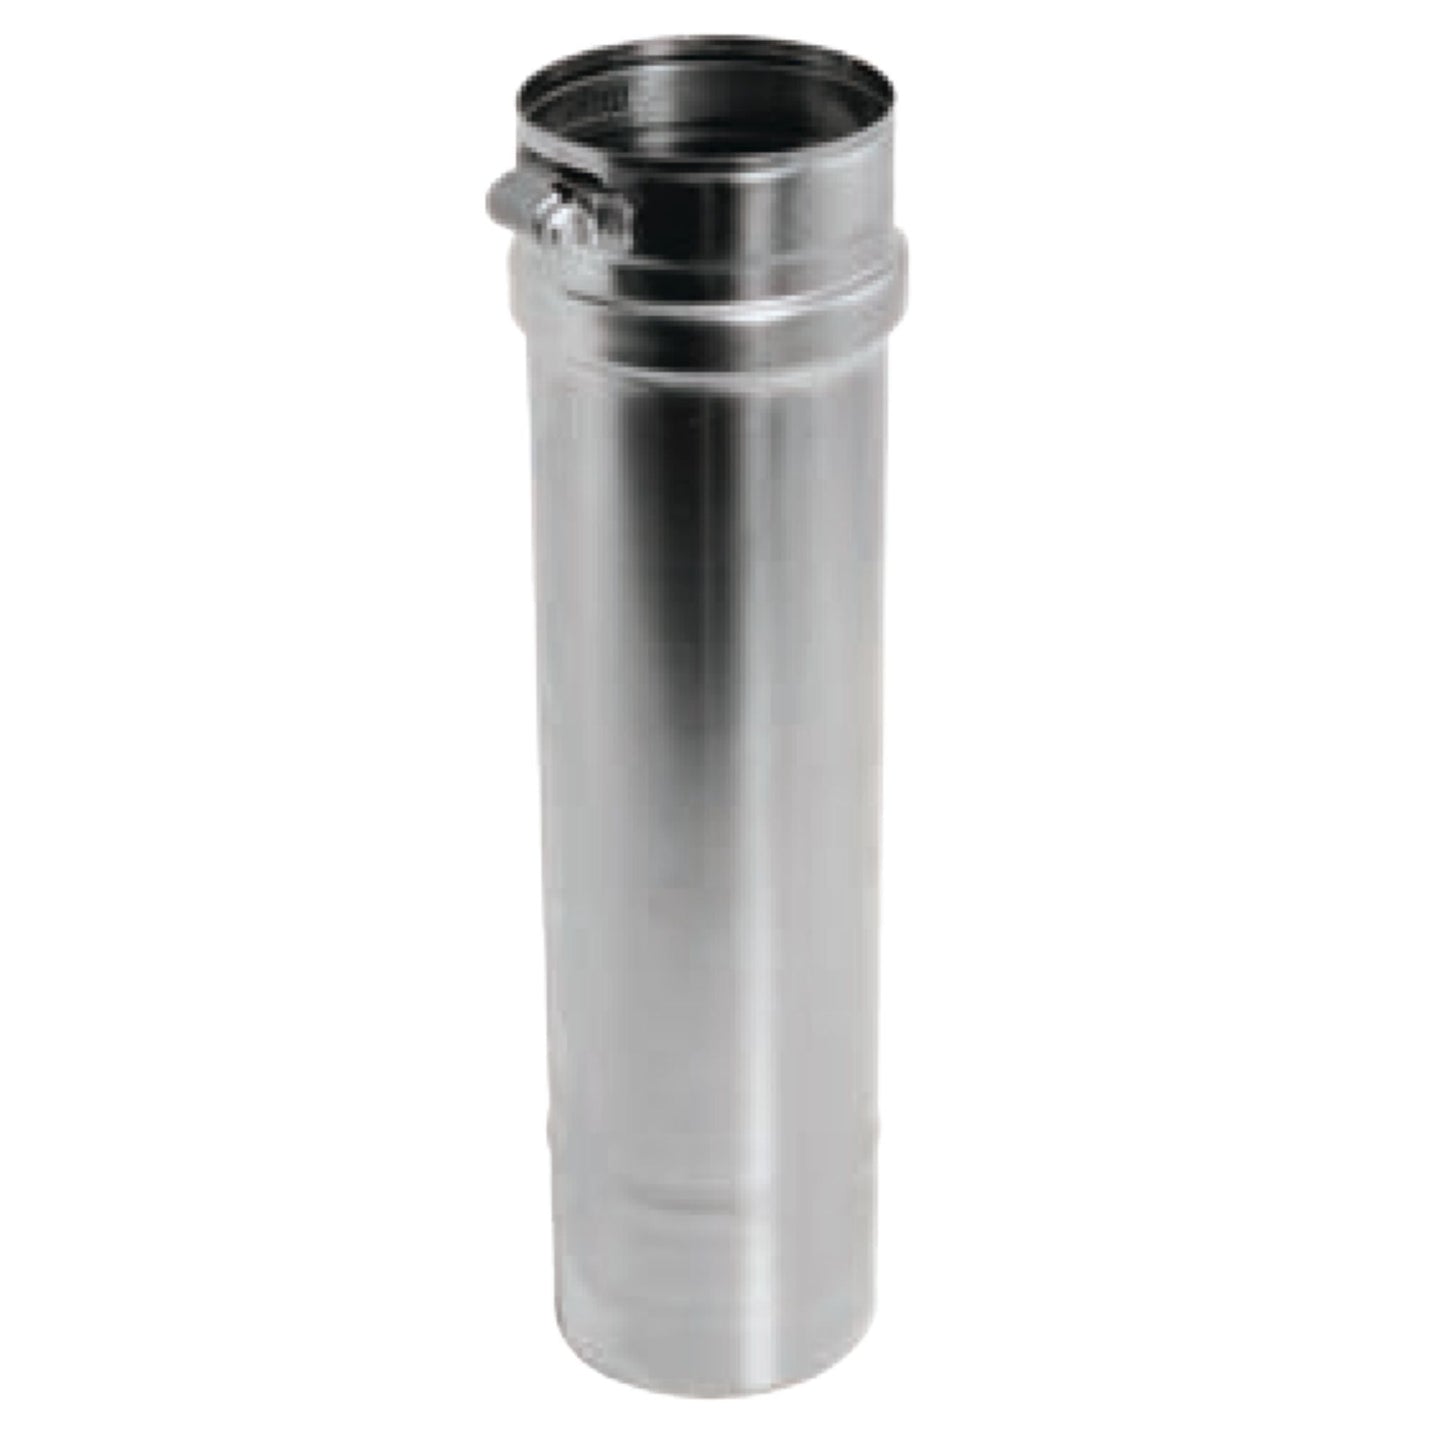 DuraVent FasNSeal 10" x 24" 316L Stainless Steel Vent Length